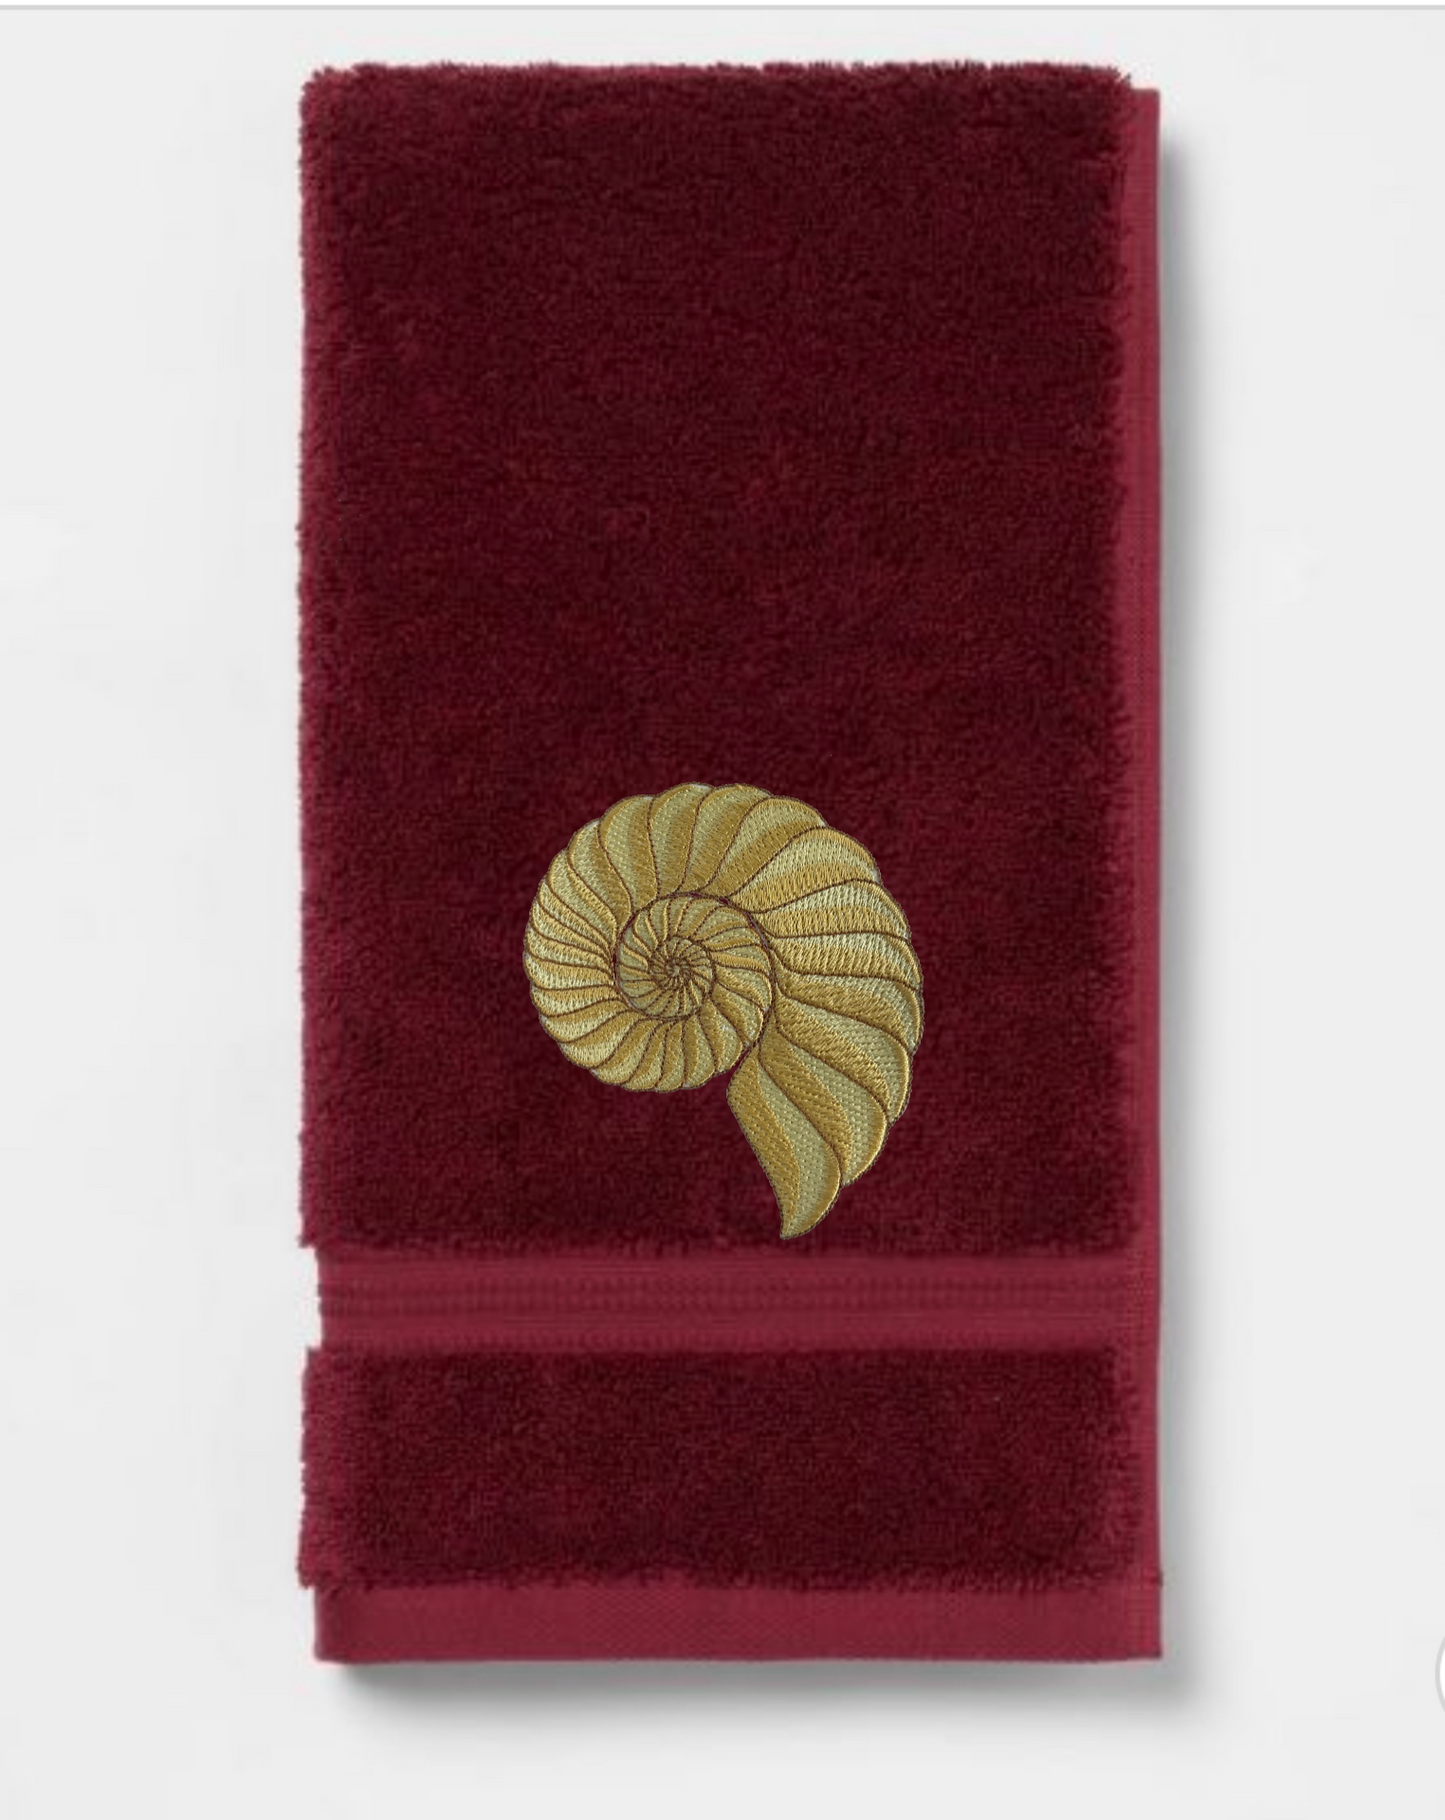 Embroidered Nautilus Shell Hand Towel. Elegant Nautilus in Beige or Green Embroidery with choice of towel color